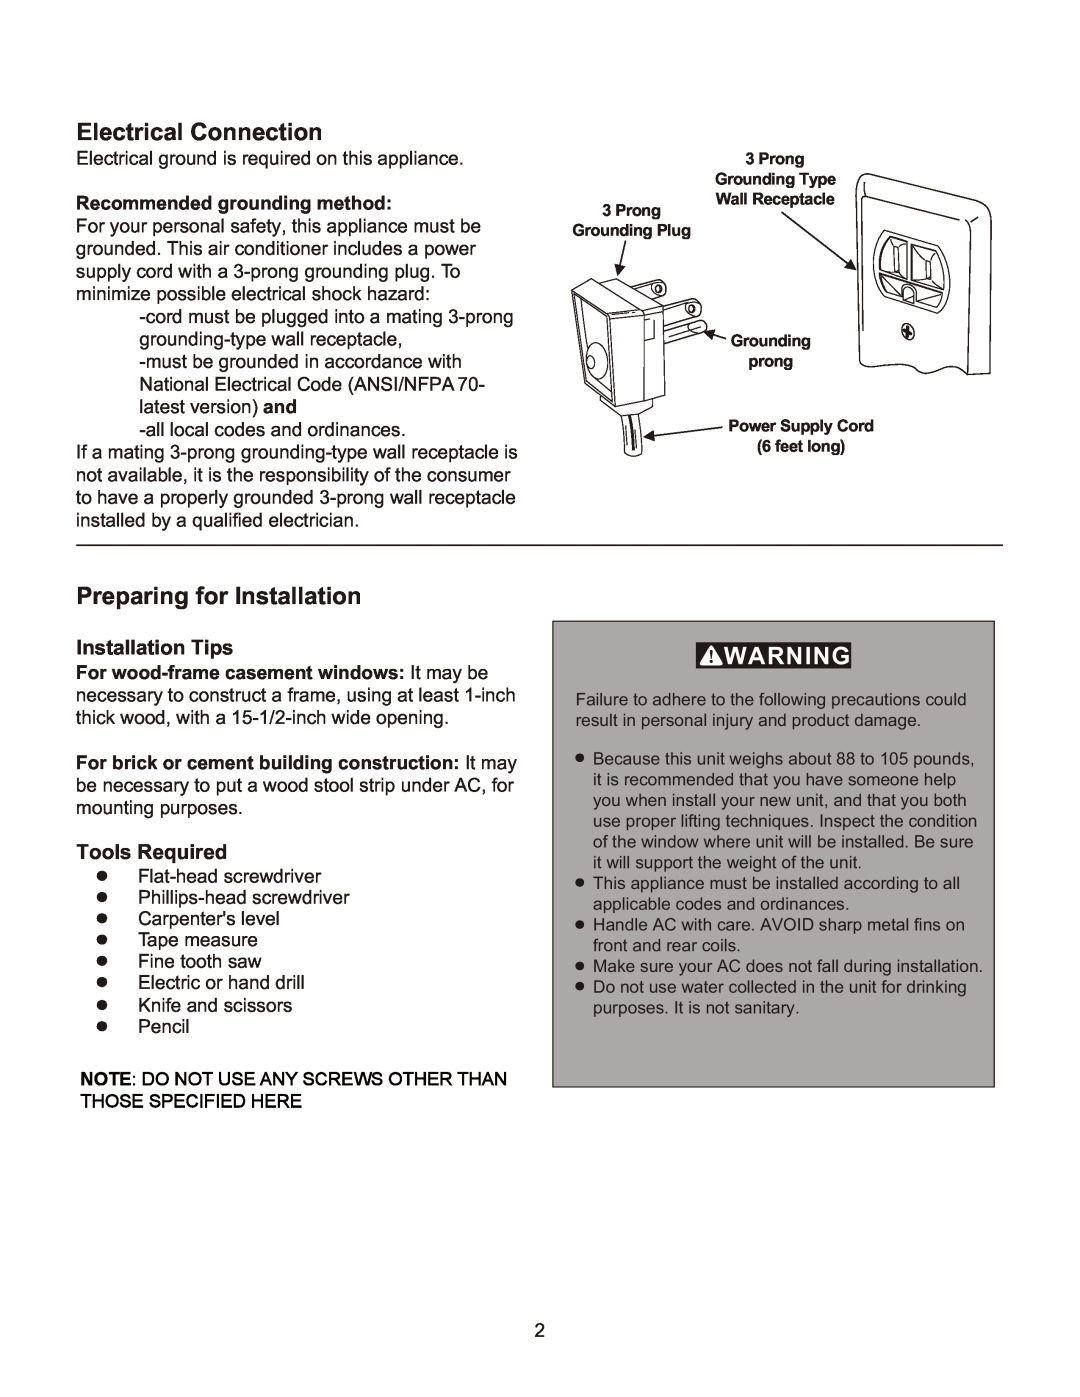 Frigidaire 2020213A0362 manual Electrical Connection, Preparing for Installation, Installation Tips, Tools Required 